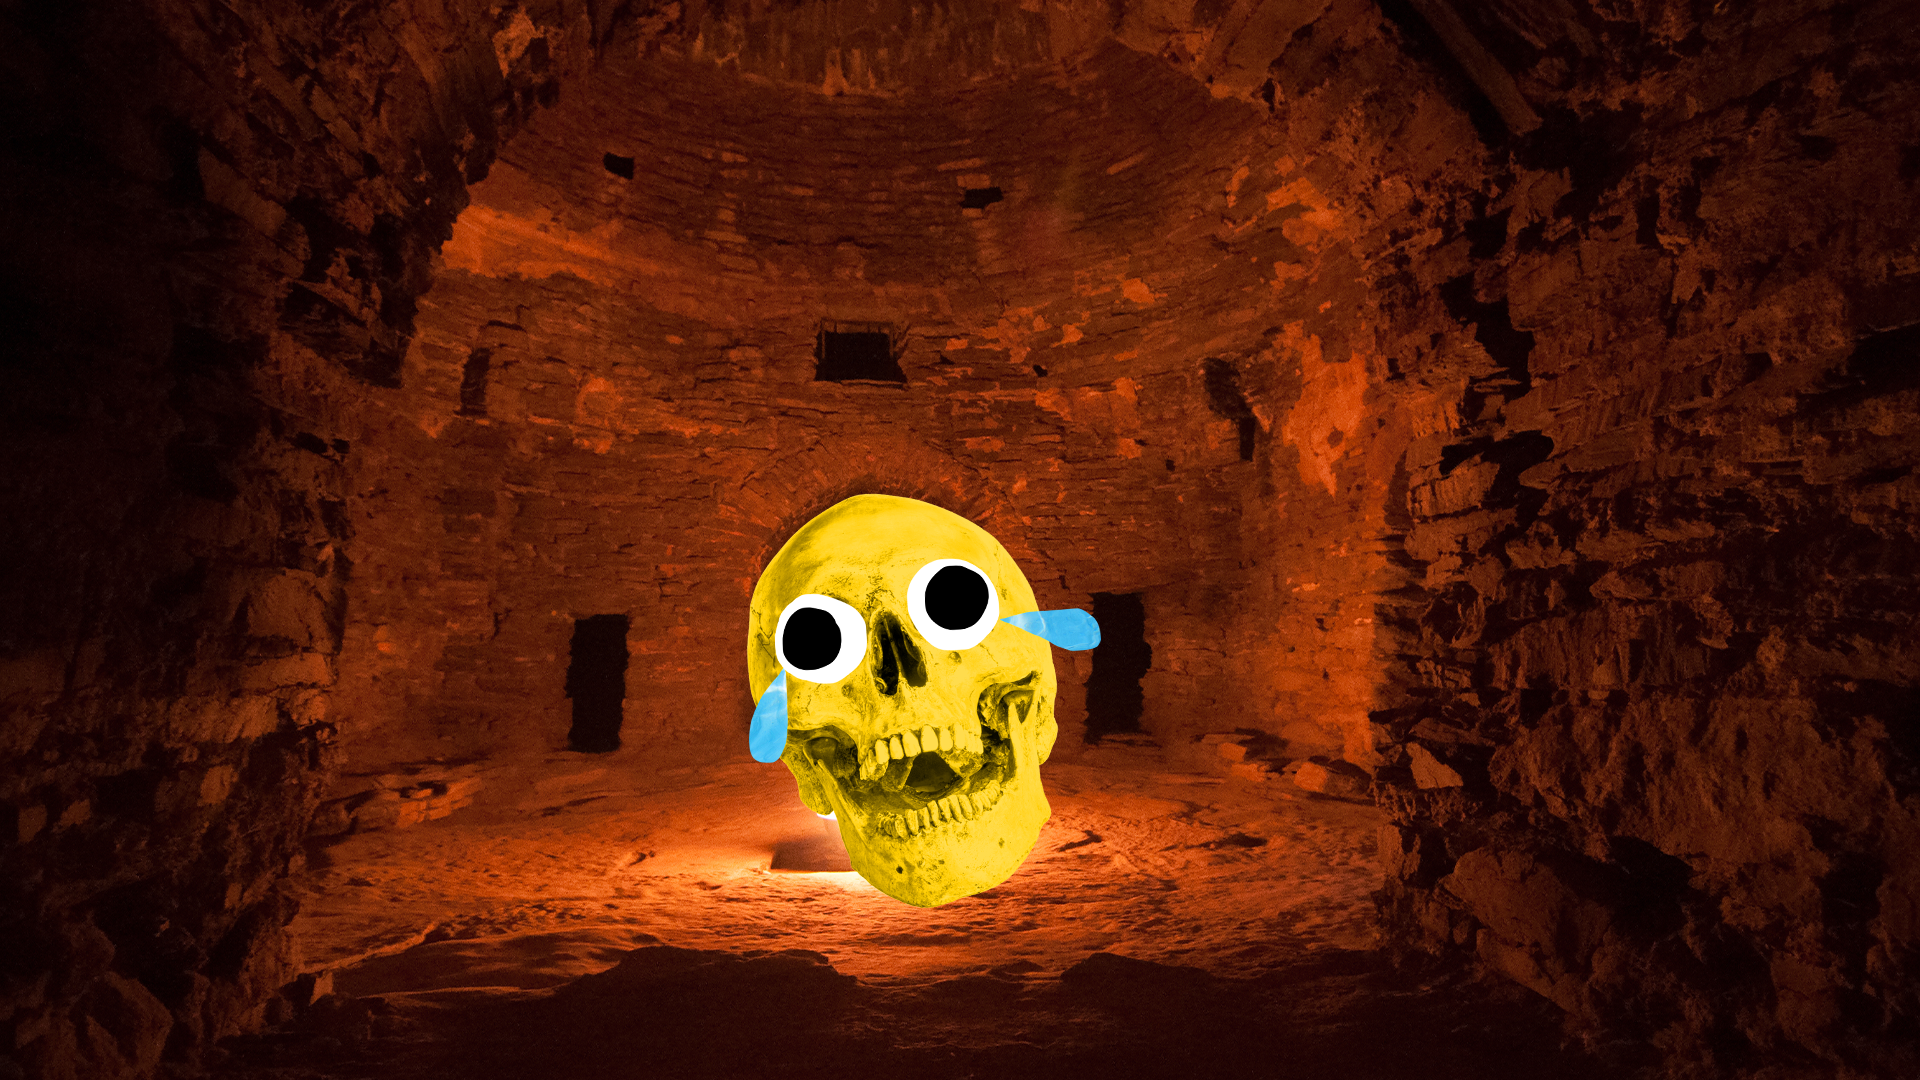 A spooky cave with a Beano skull in it